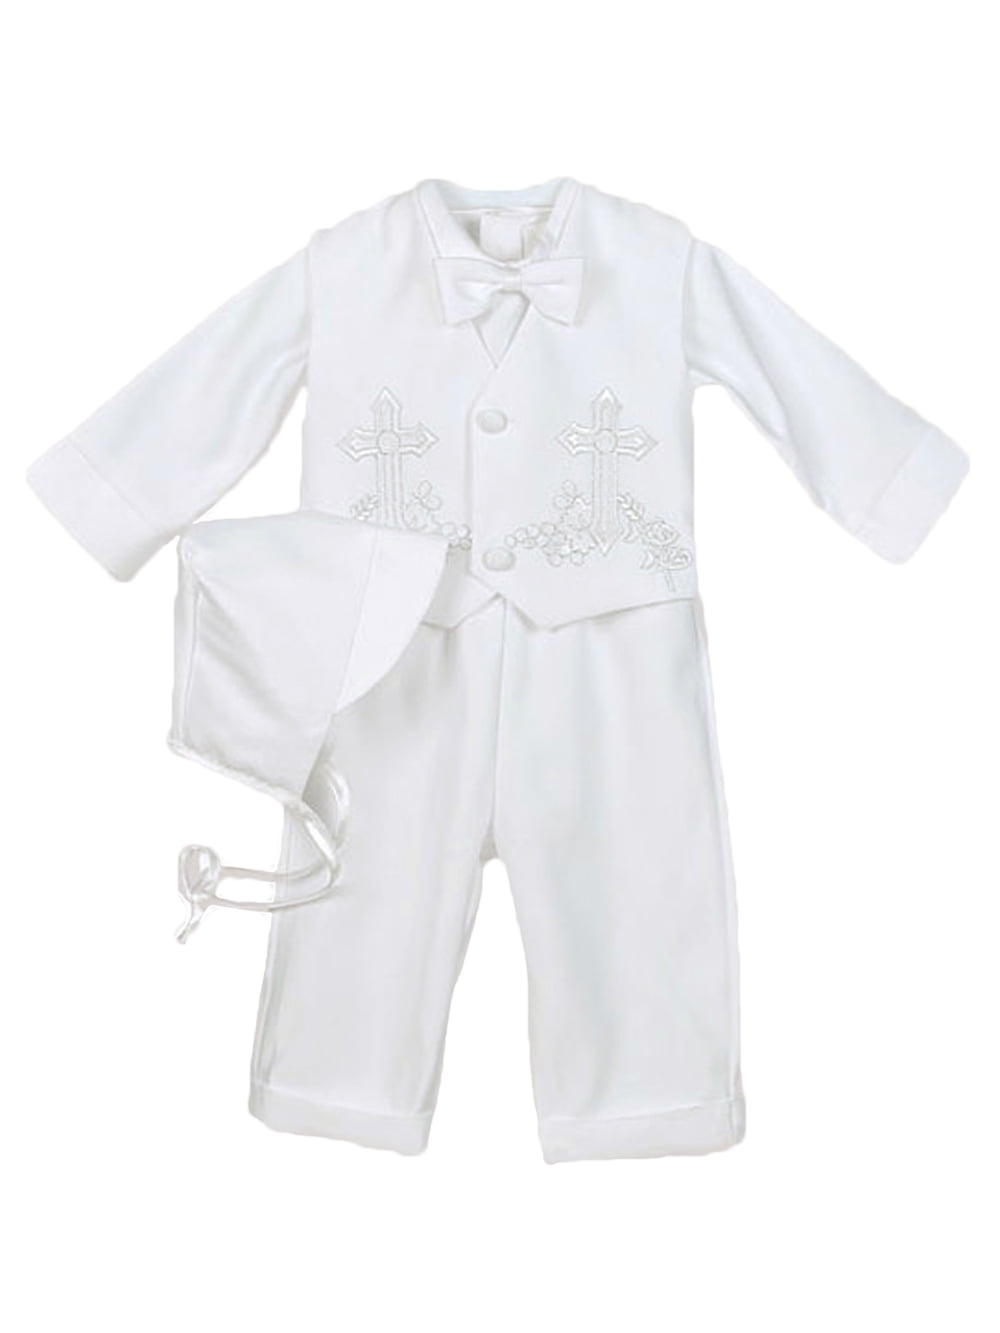 Christening Suit White Check Baby Boys 4 Piece Christening Outfit 